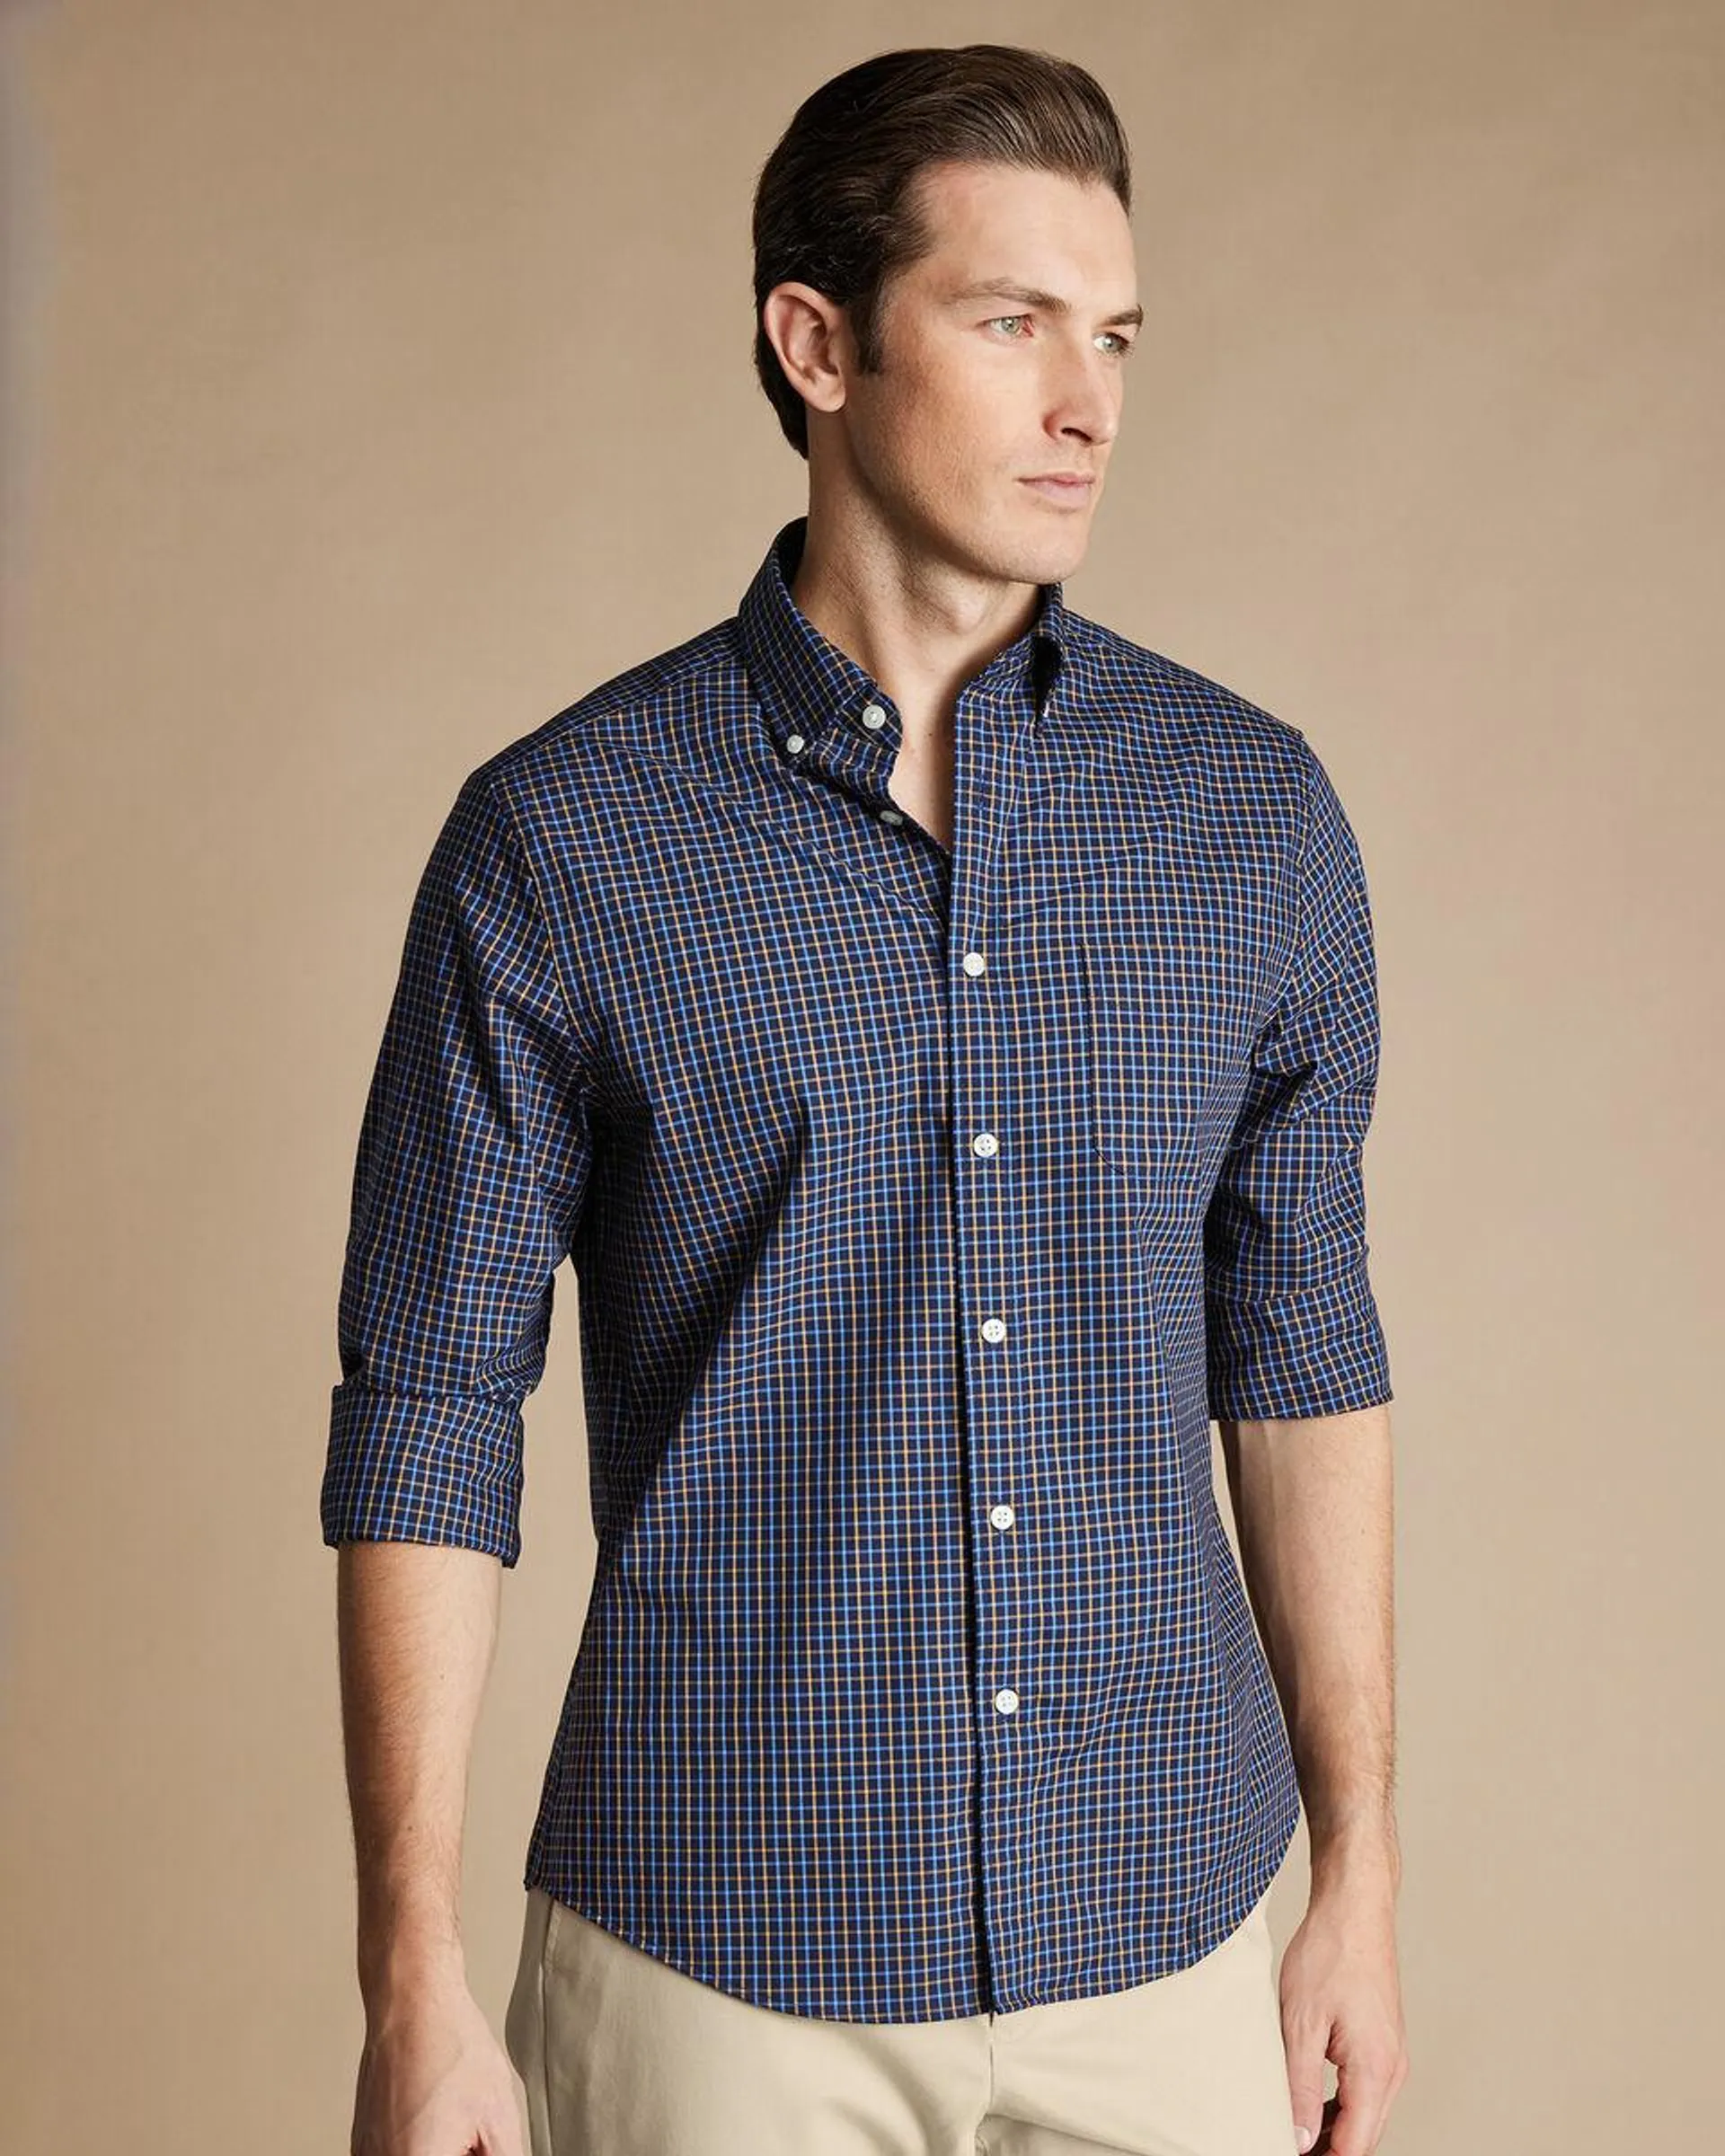 details about product: Button-Down Collar Non-Iron Stretch Poplin Fine Line Check Shirt - Navy & Gold